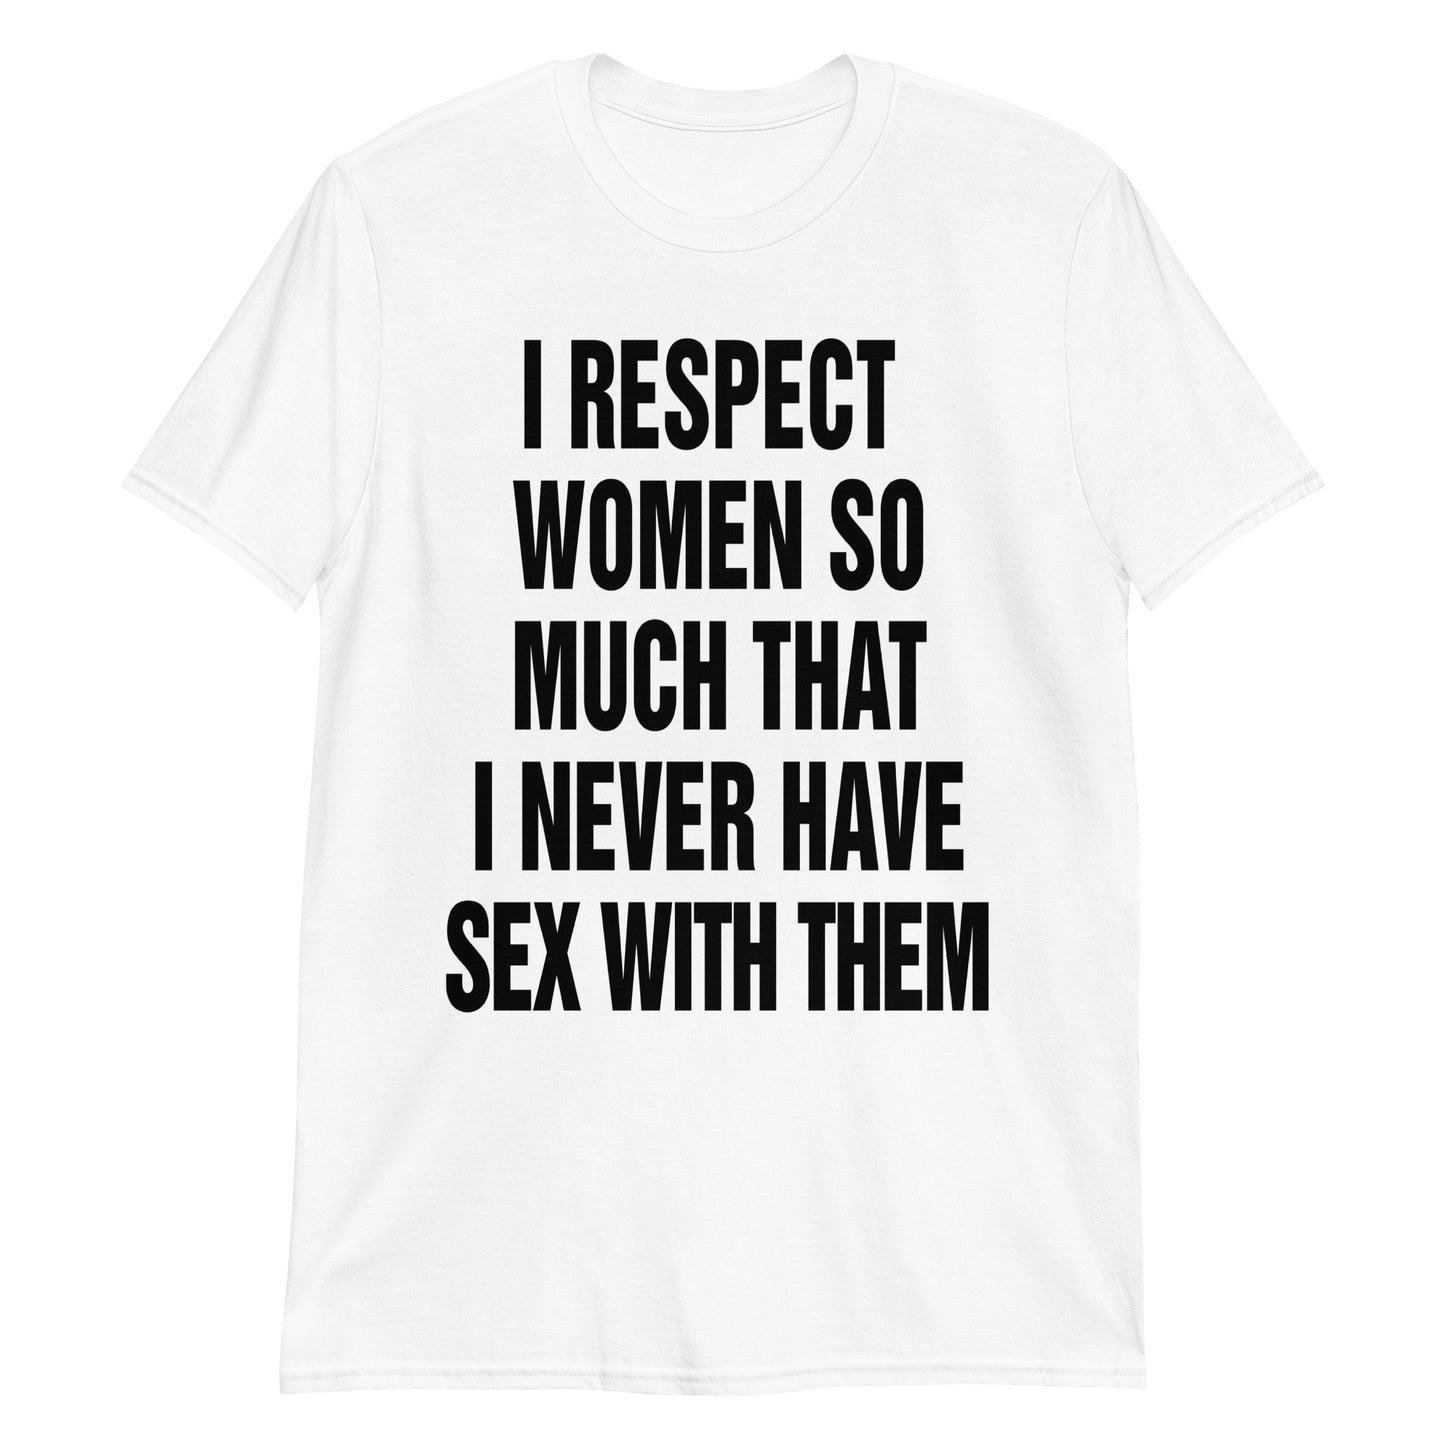 I Respect Women So Much I Never Have Sex With Them.